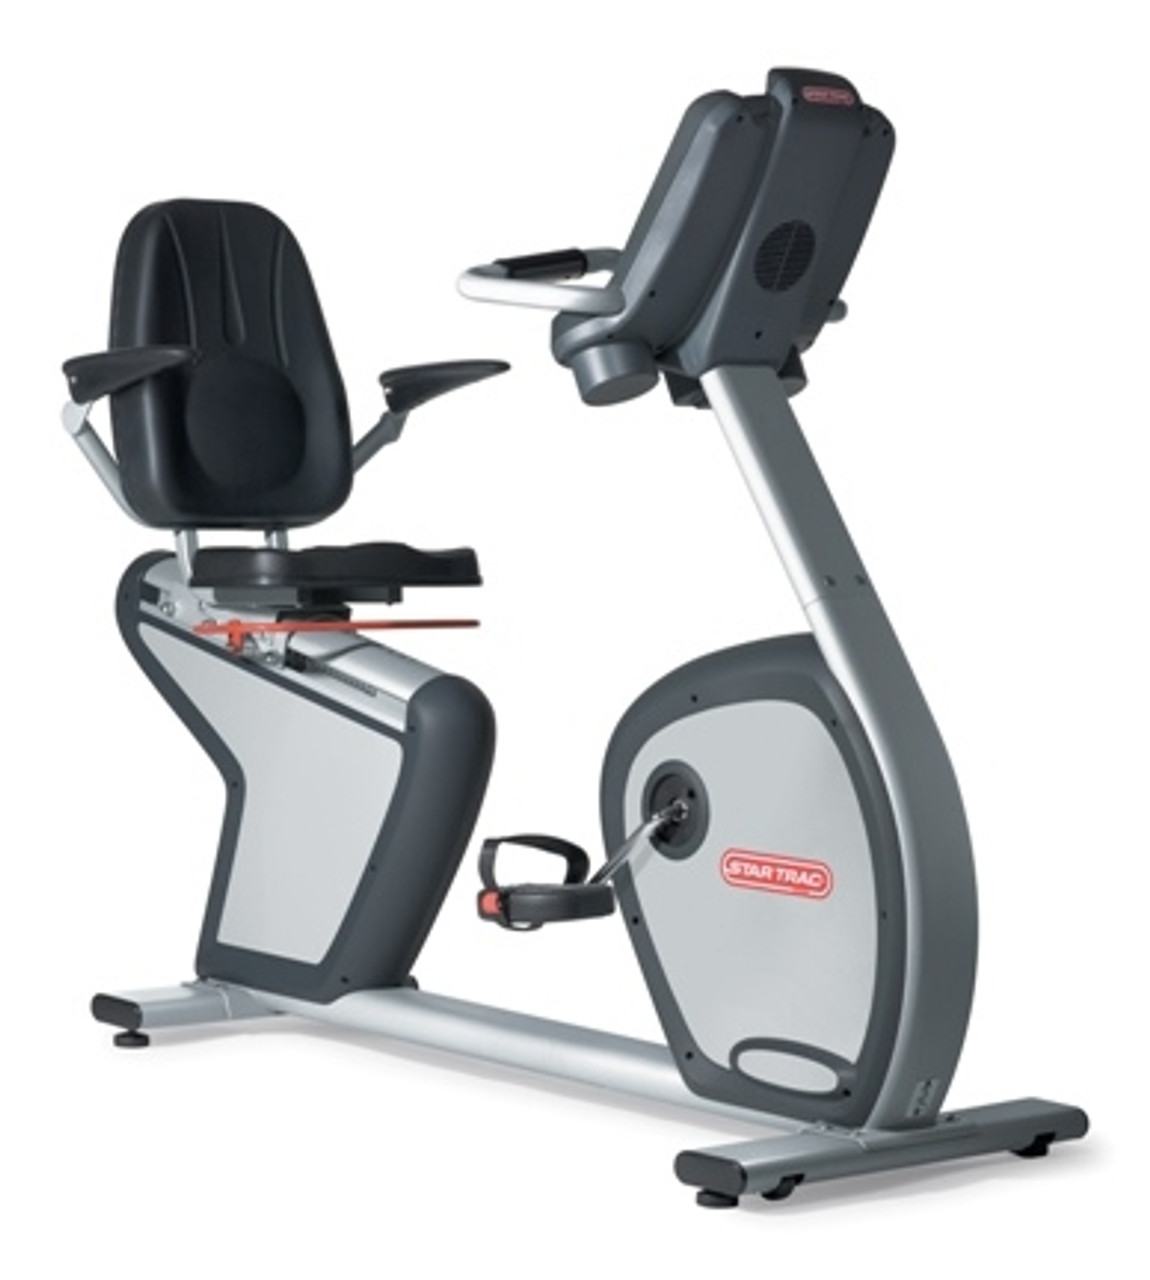 Review of Star Trac Exercise Bikes